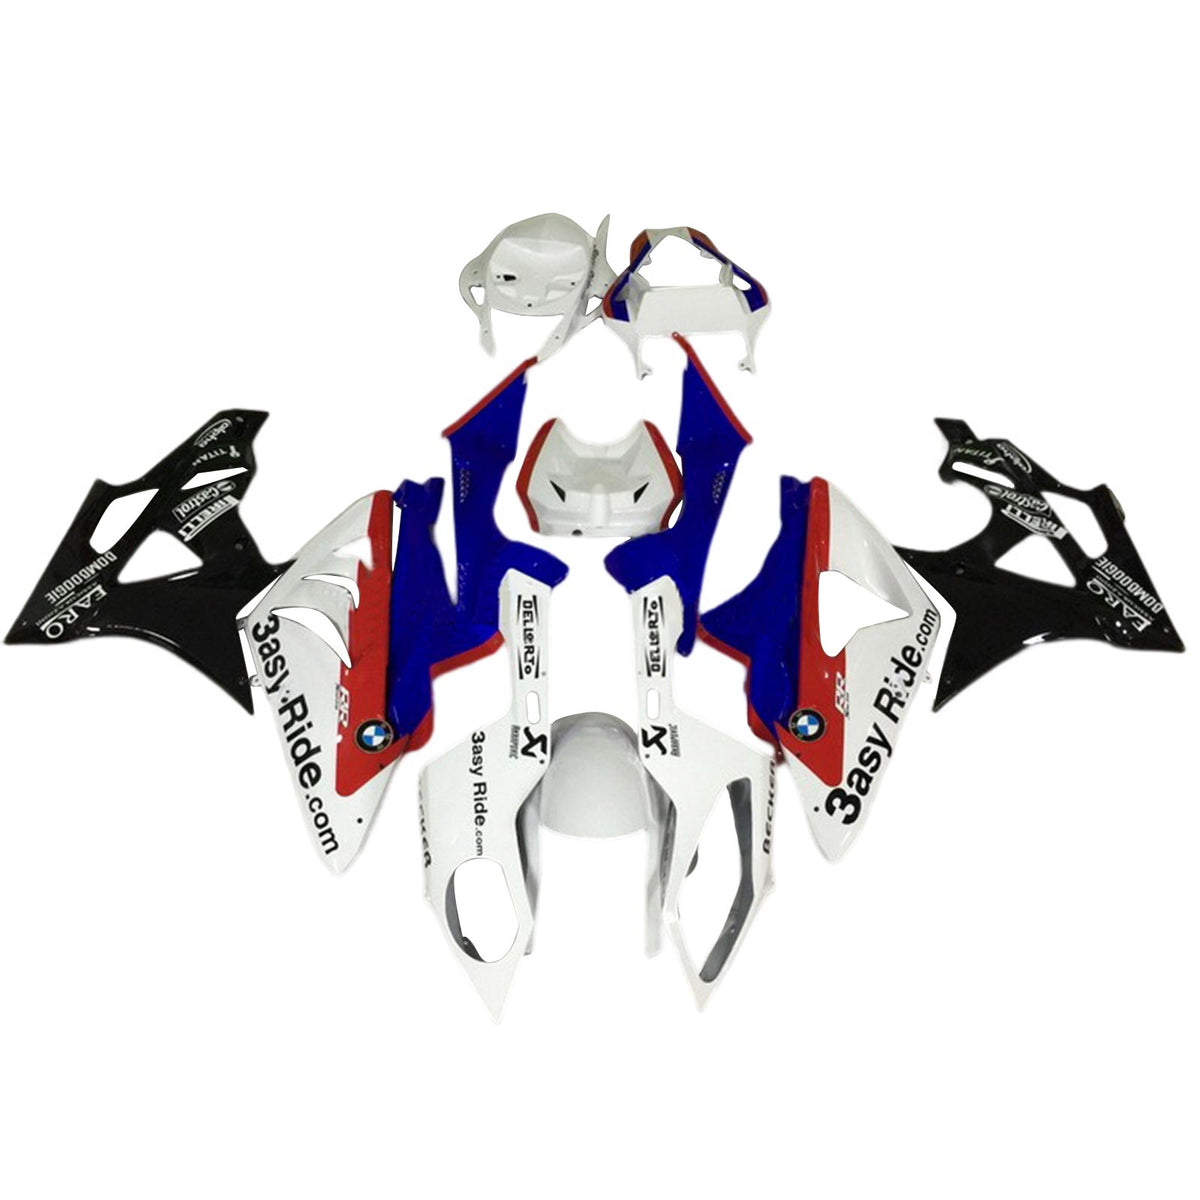 Amotopart BMW S1000RR 2015-2016 Blue&Red Style7 Fairing Kit